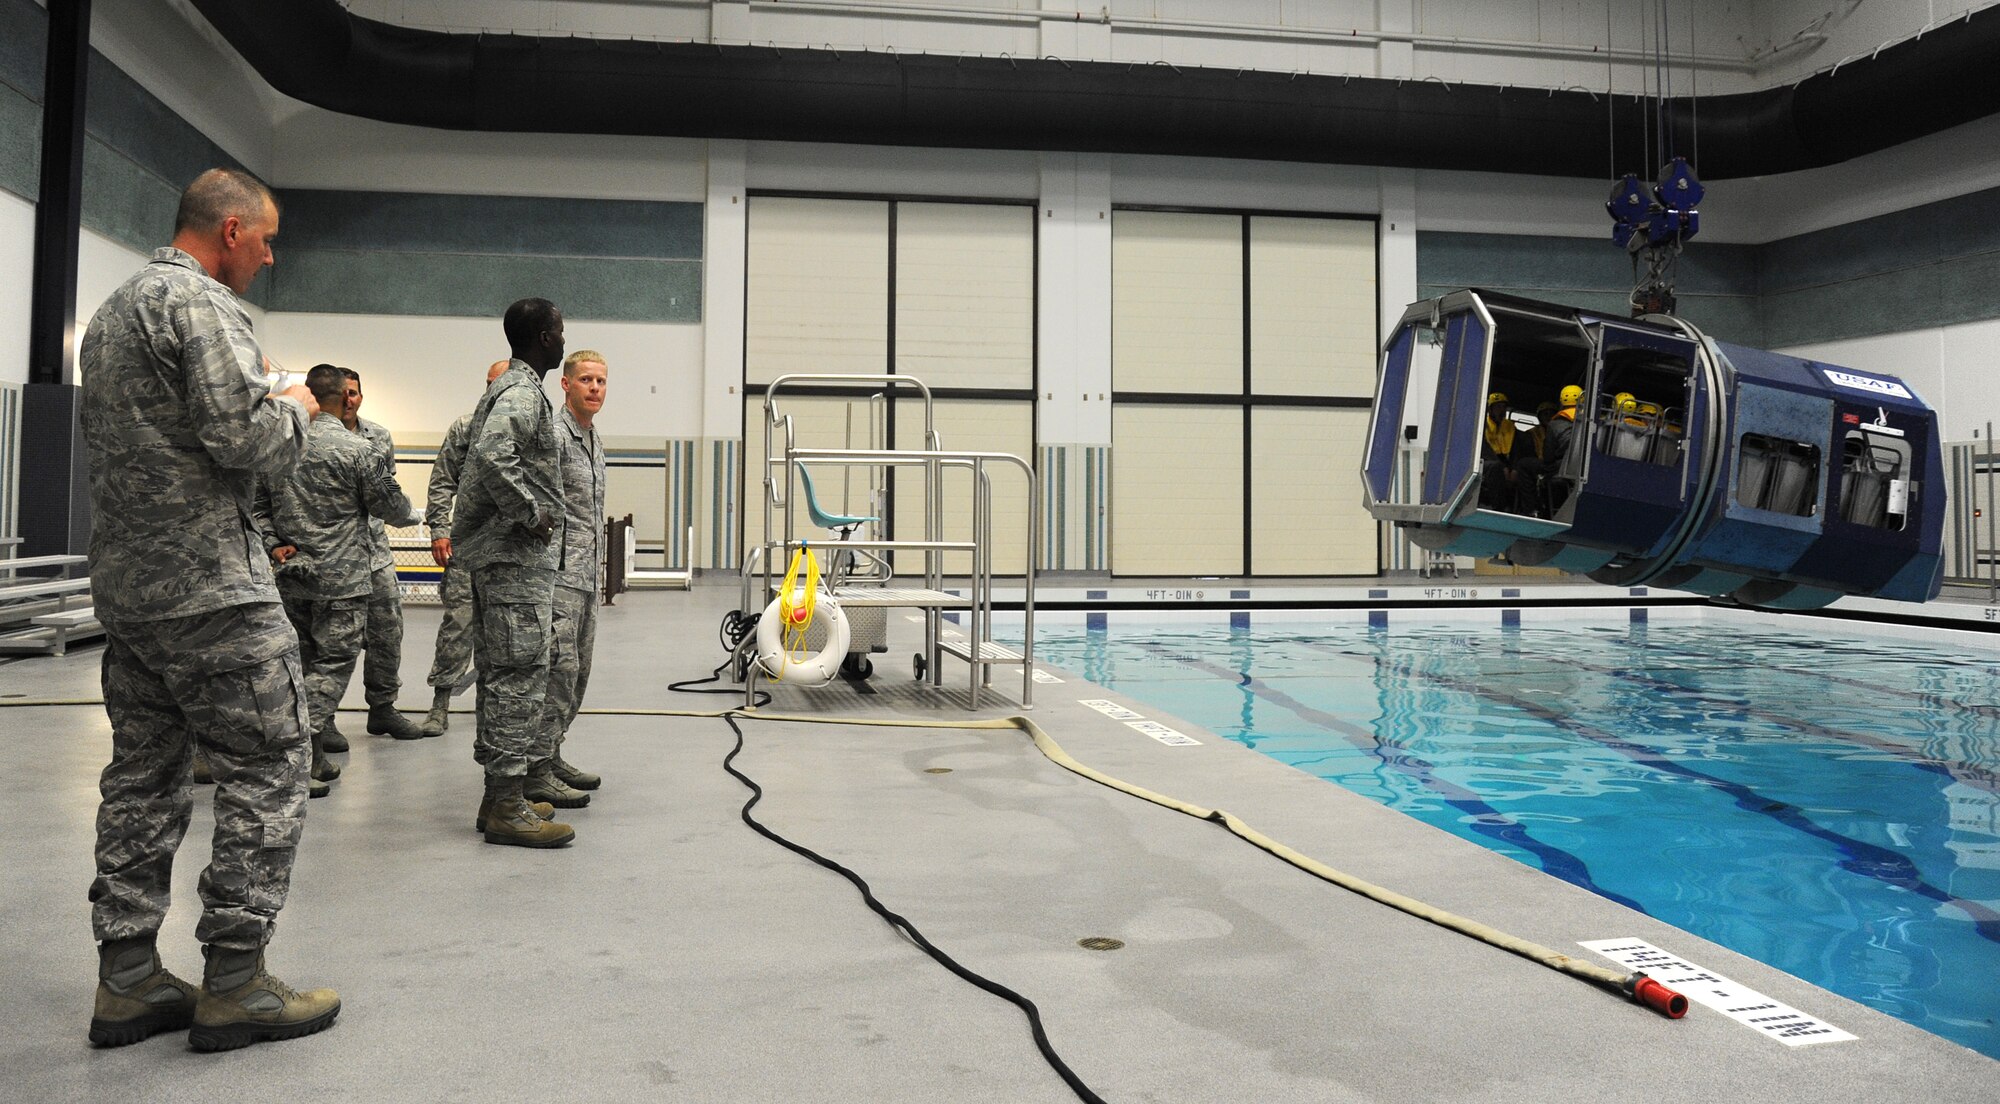 Gen. Edward Rice, commander of the Air Education and Training Command, observes a Survival, Evasion, Resistance, and Escape exercise at the water training facility at Fairchild Monday, July 1, 2013.  The general was at Fairchild to tour the operations of the 336th Training Group.  (U.S. Air Force photo by Airman 1st Class Sam Fogleman/Released)